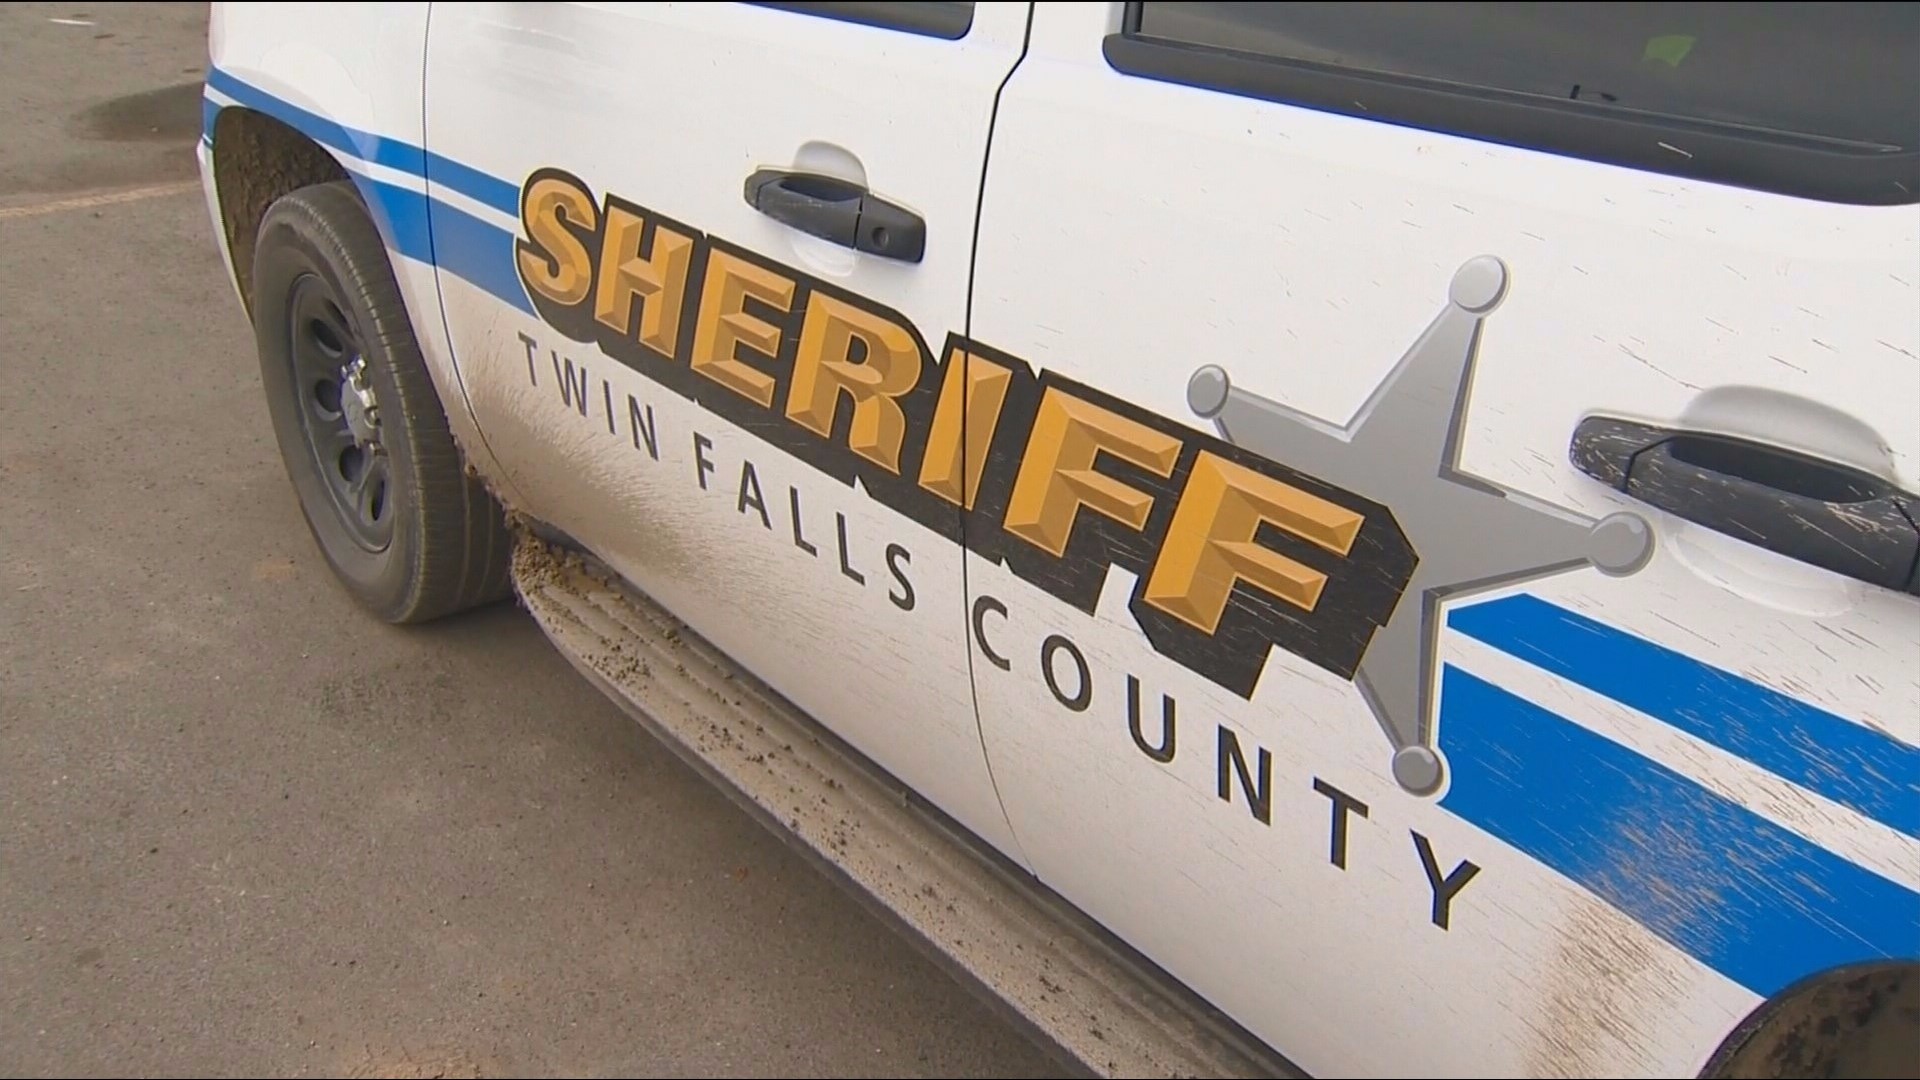 The male student has been charged with threatening violence on school grounds, the Twin Falls County Sheriff's Office said.